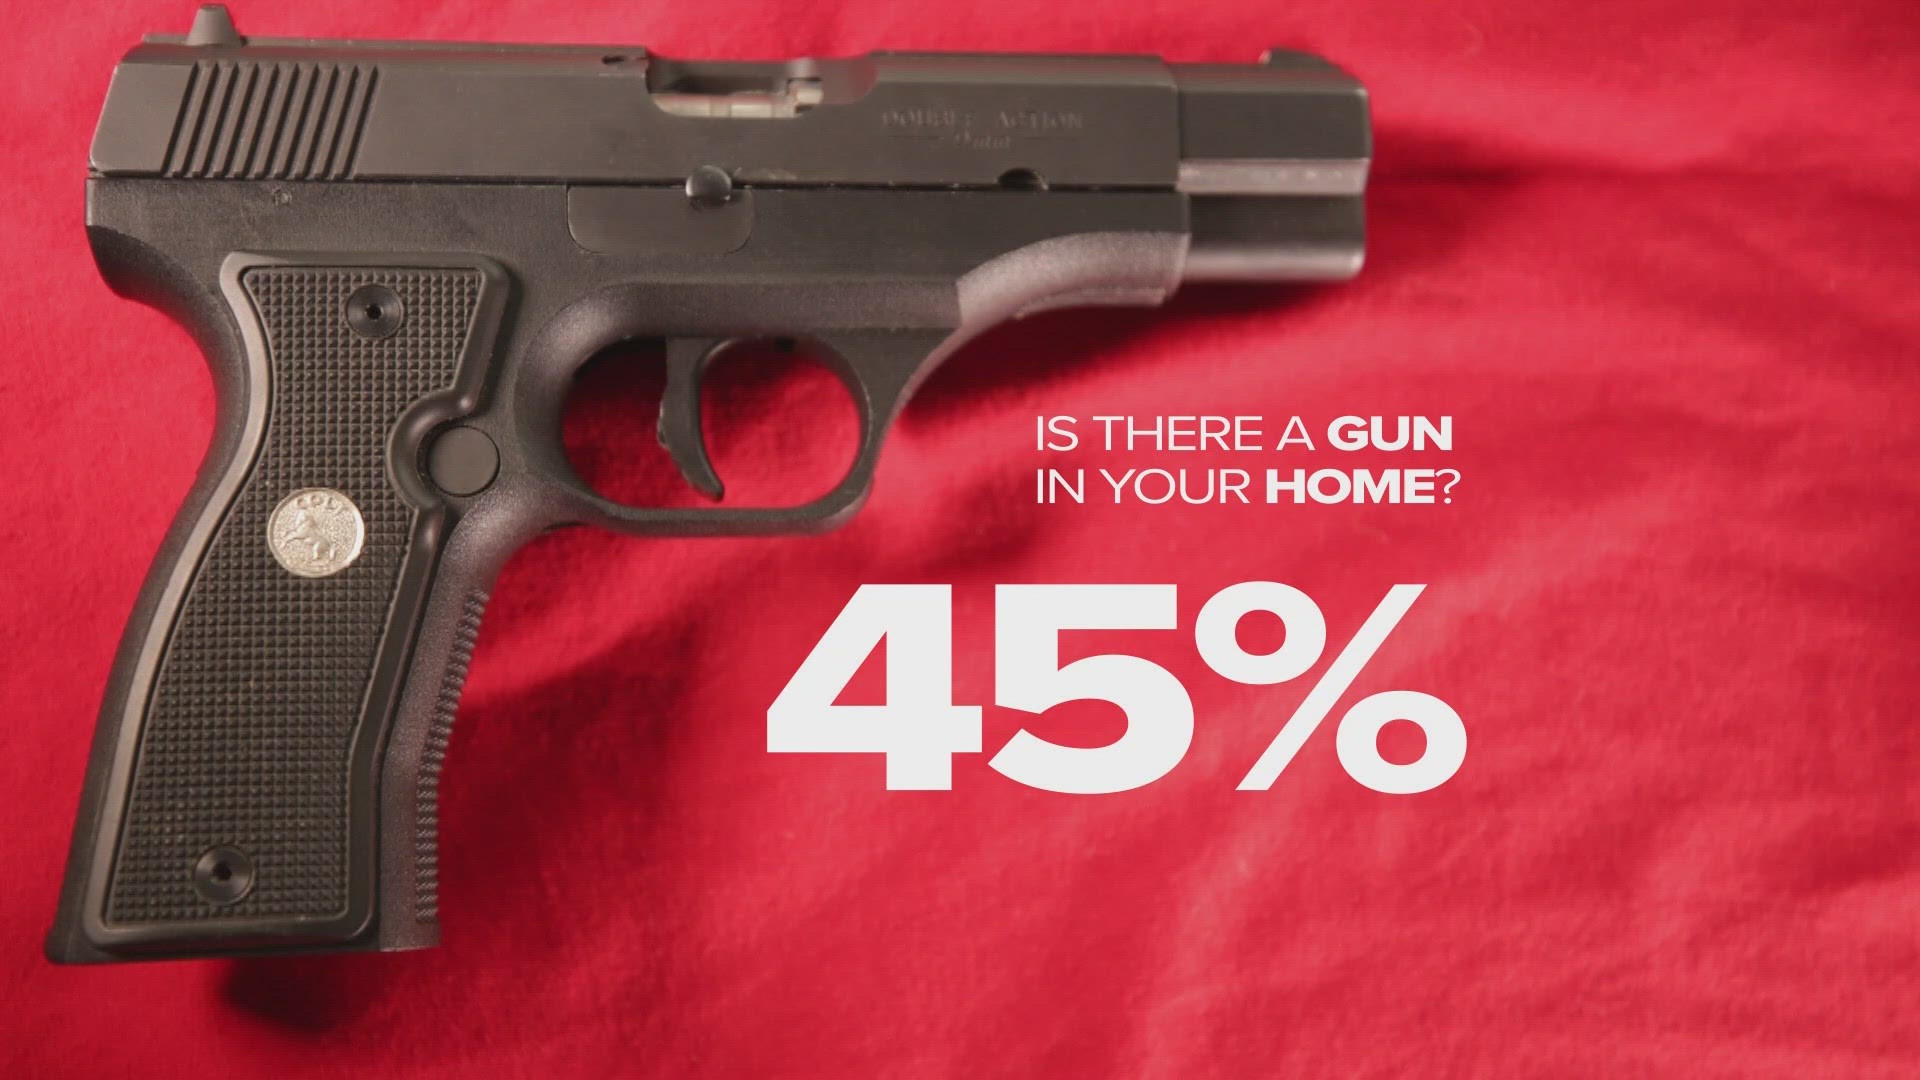 The goal of the survey was to gather baseline data that can help guide future efforts to curb gun injuries and deaths.